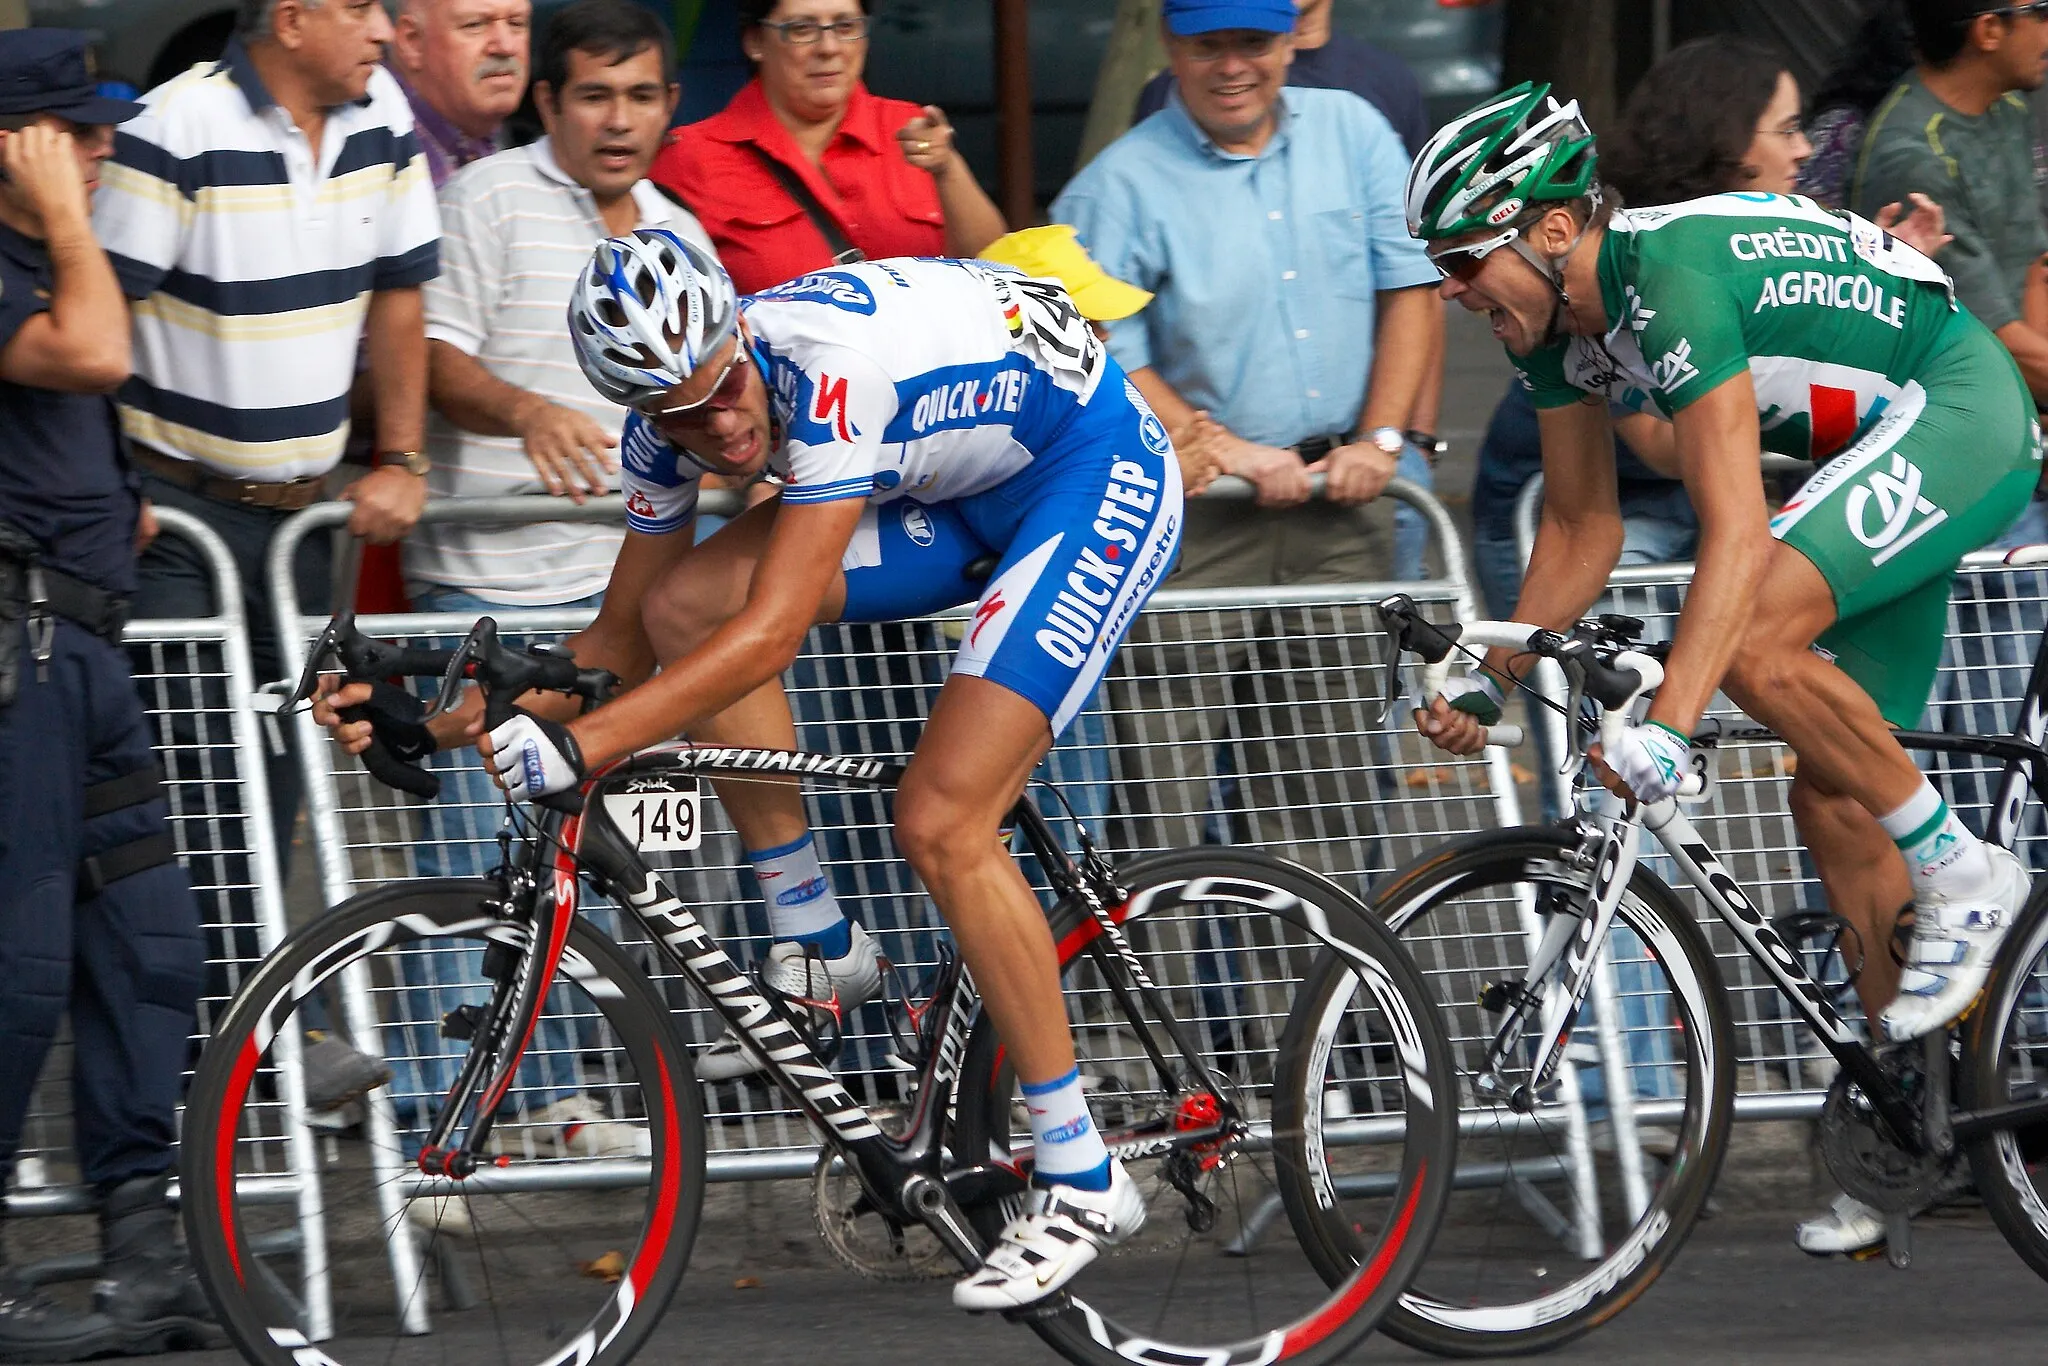 Photo showing: VAN IMPE Kevin (149/BEL) and HUNT Jeremy (73/GBR), 2008 Vuelta a España, Madrid, Spain.